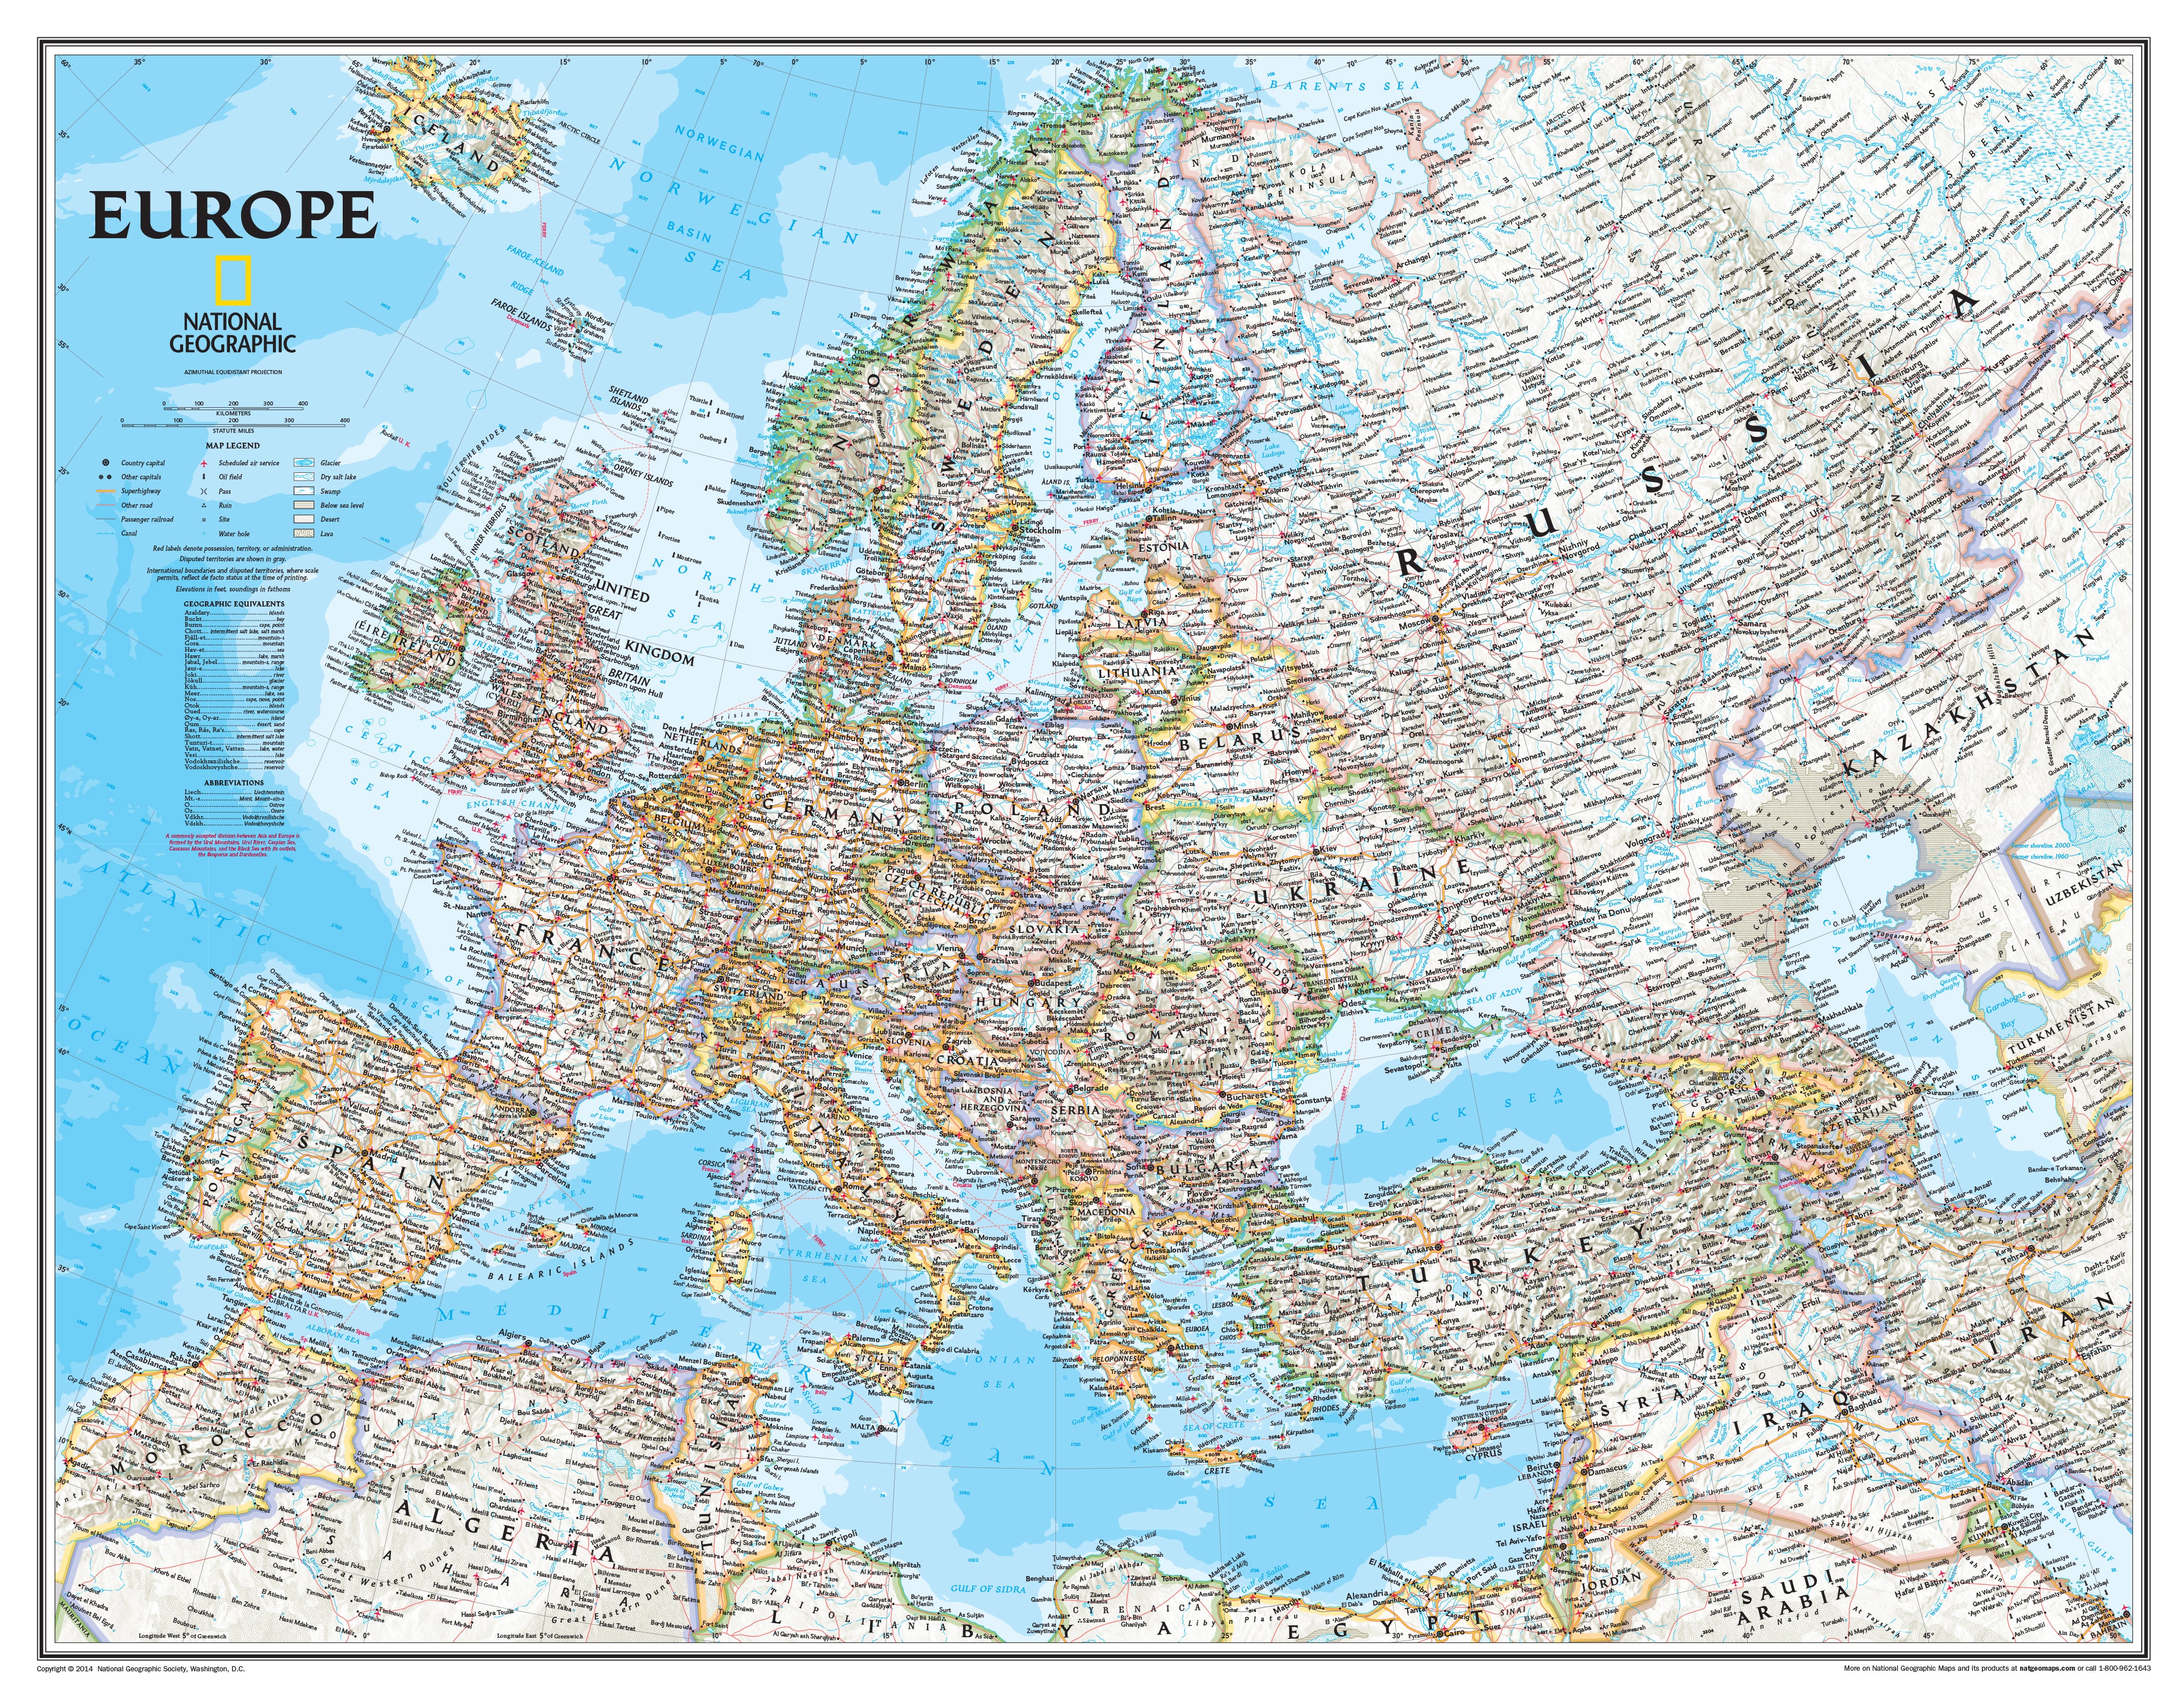 Europe a part of National Geographic Political 7 Continent Maps Classroom Pull Down 7 Map Bundle